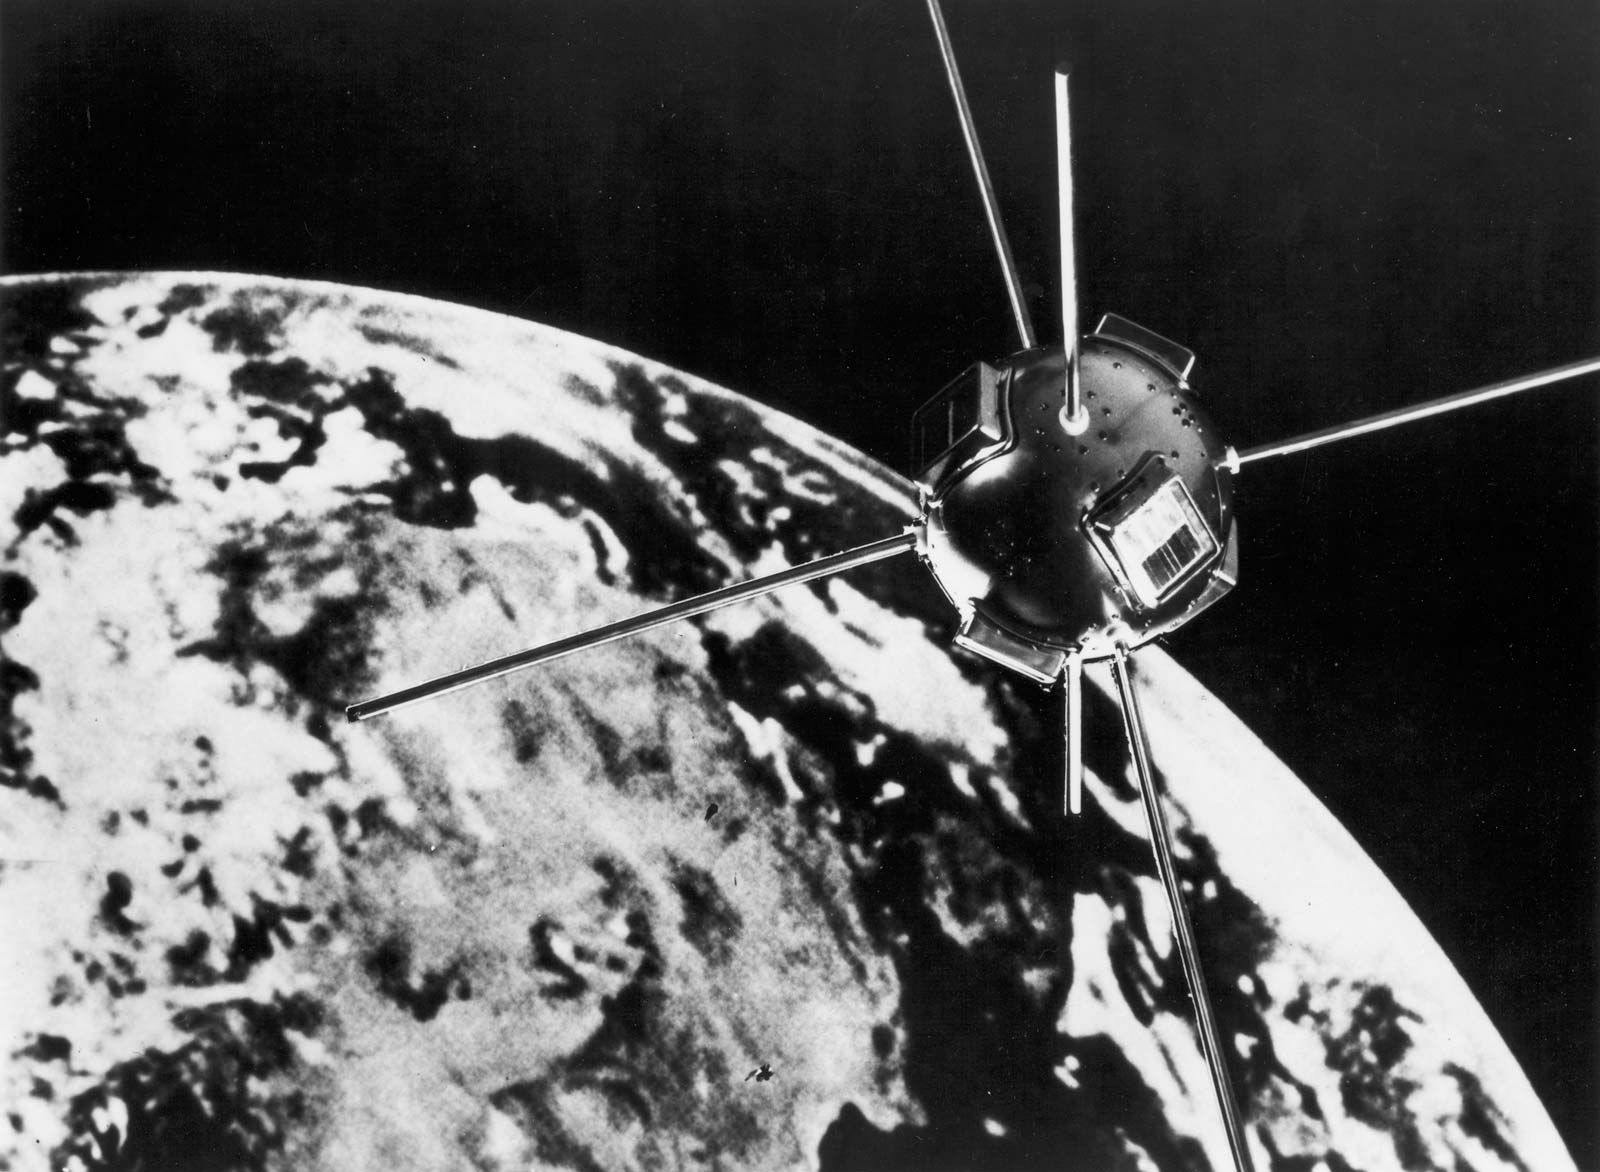 The first satellite